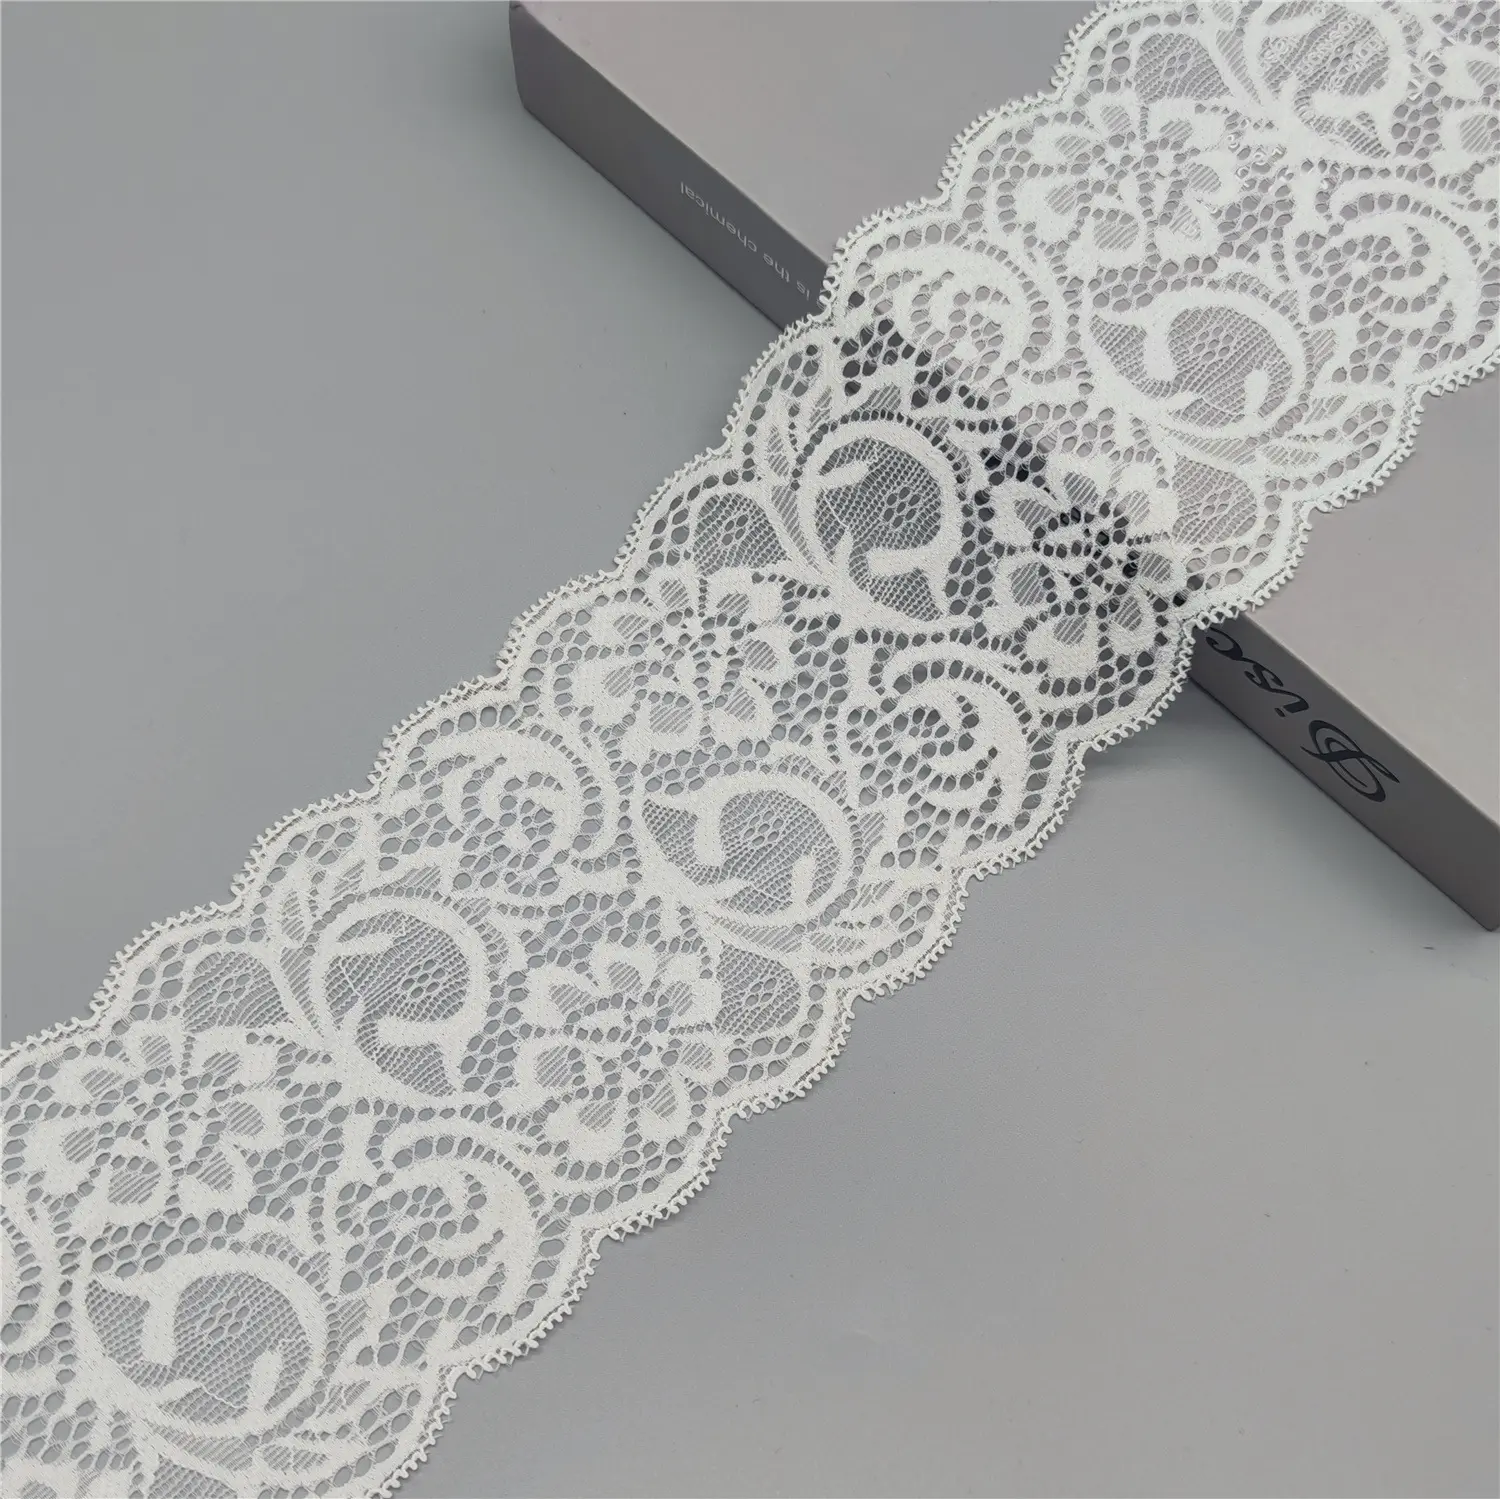 V1903 10 cm elastic knitting galloon lace decorative lace trim for lingerie underwear skirt wedding dress baby's clothing